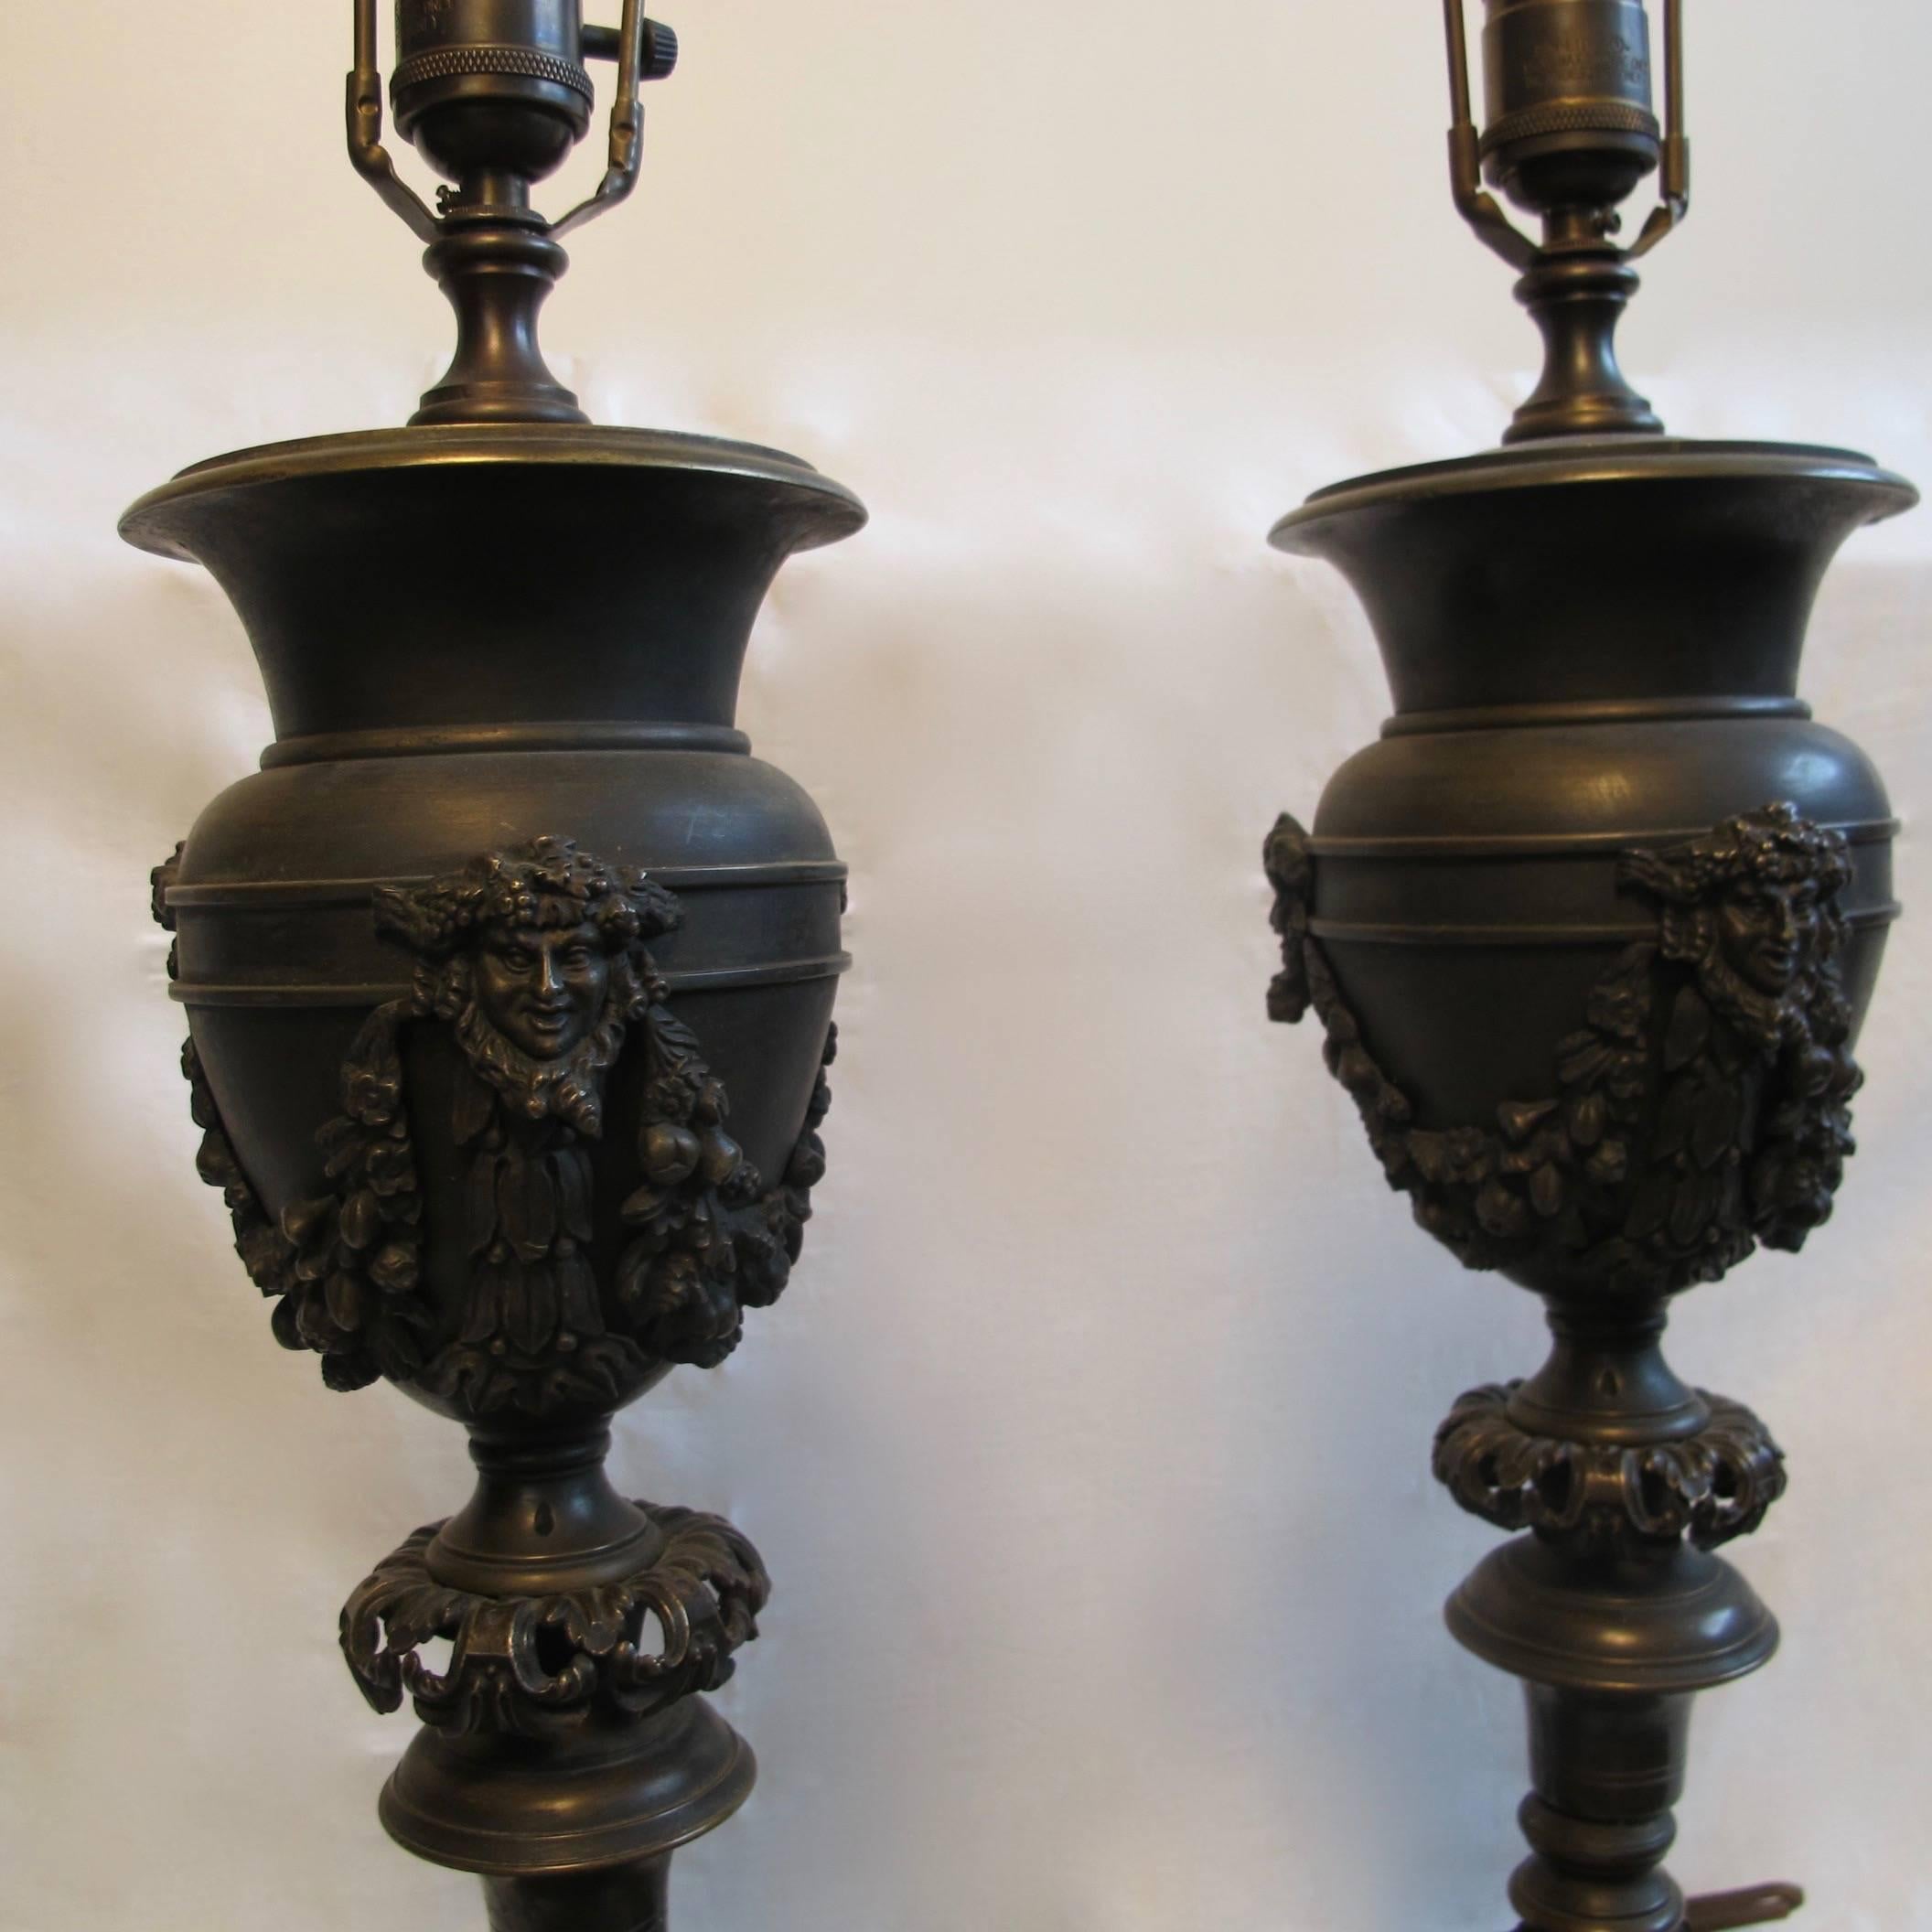 Pair of 19th Century European Bronze Newel Post Urn Lamps For Sale 2